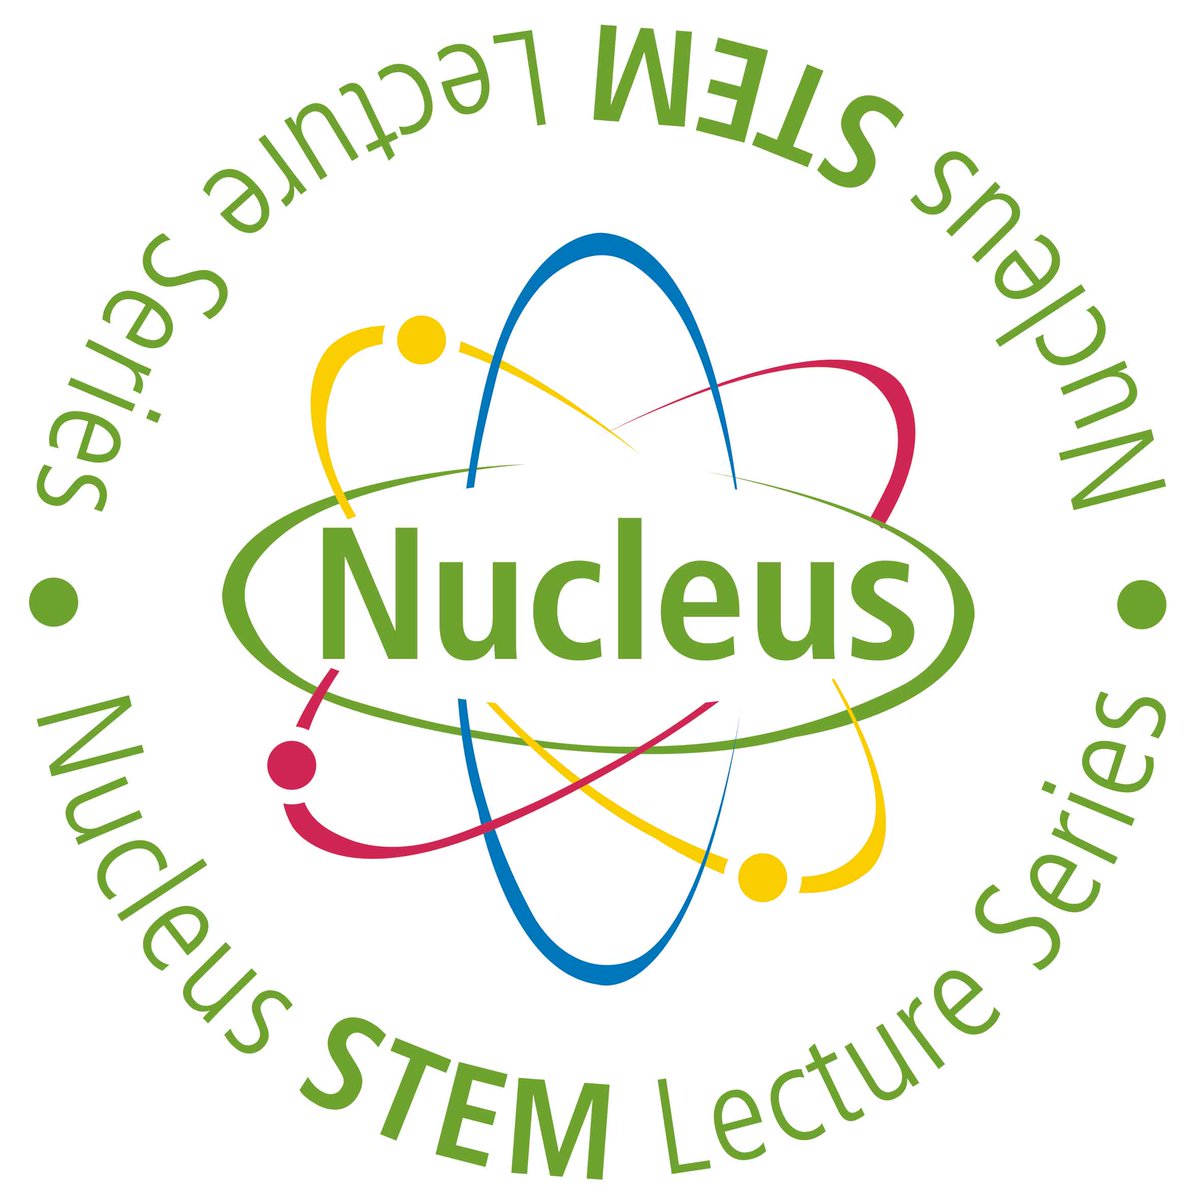 This week's Nucleus STEM Lecture welcomes Matt Smith, operating standards manager at Costa Coffee. Wednesday at 3.15pm, all students are welcome to attend.